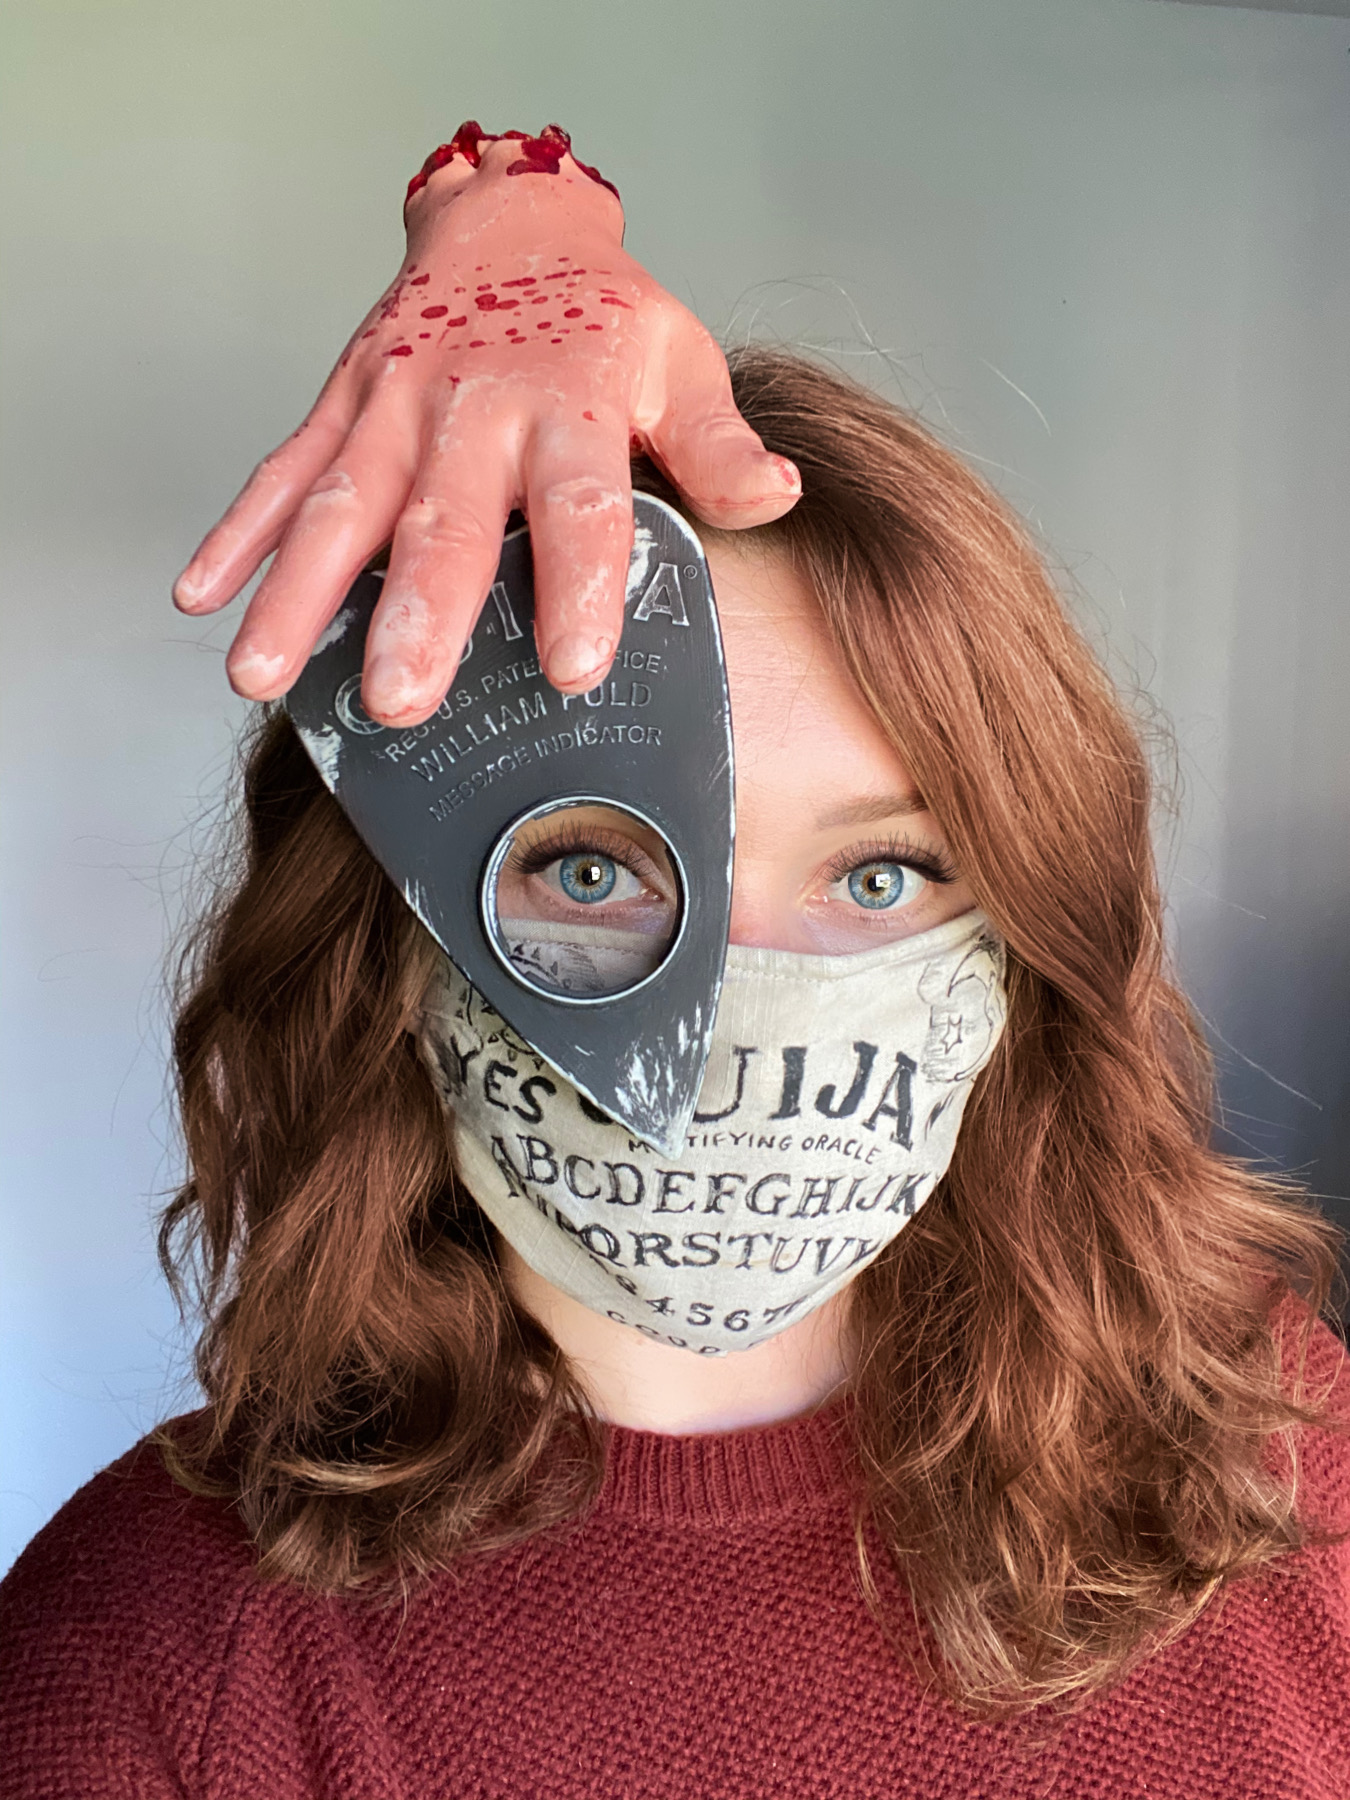 A costume for everyone in 2020: Ouija wear a mask?!?